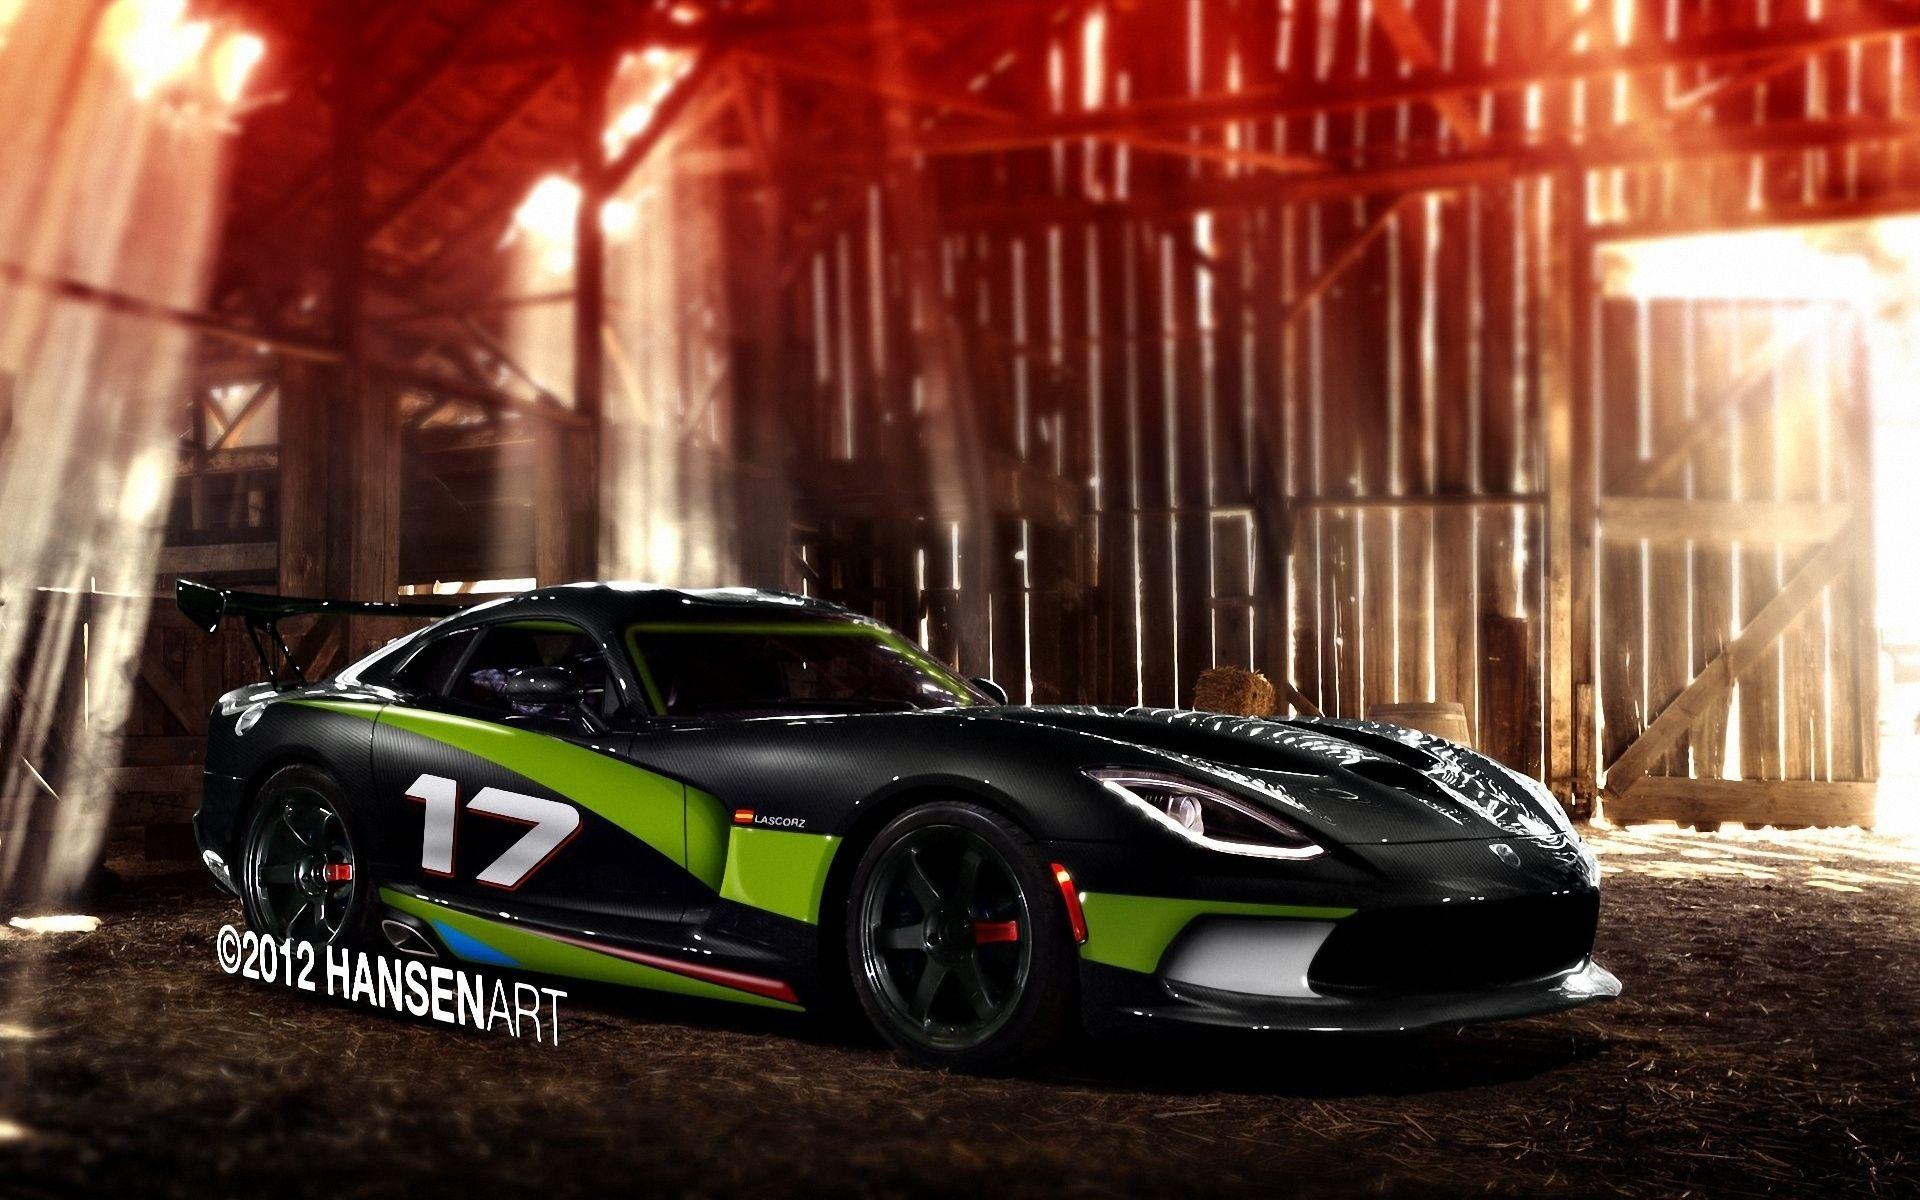 Viper Car Wallpaper For Android